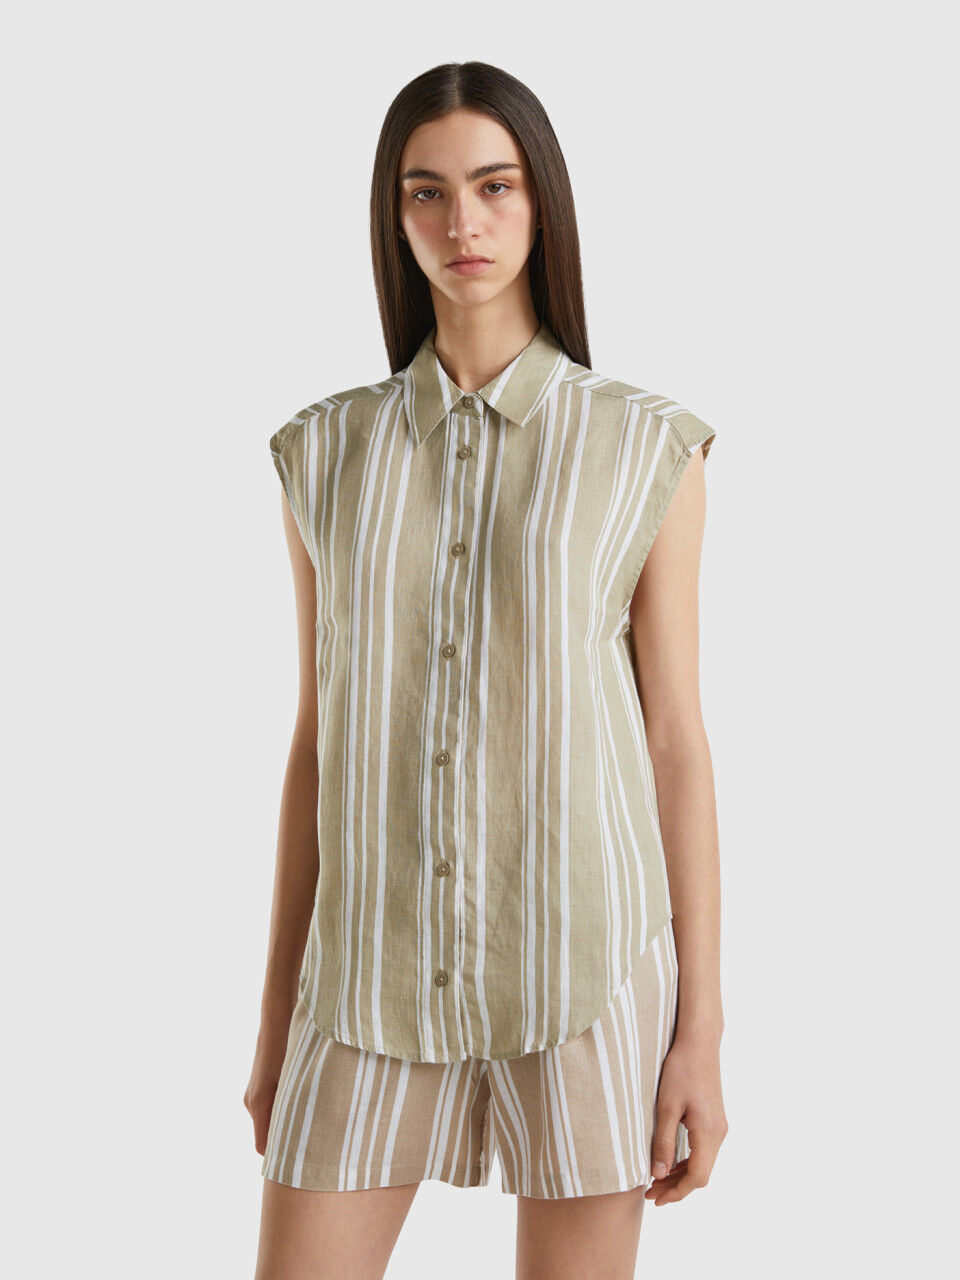 Shirt in pure printed linen